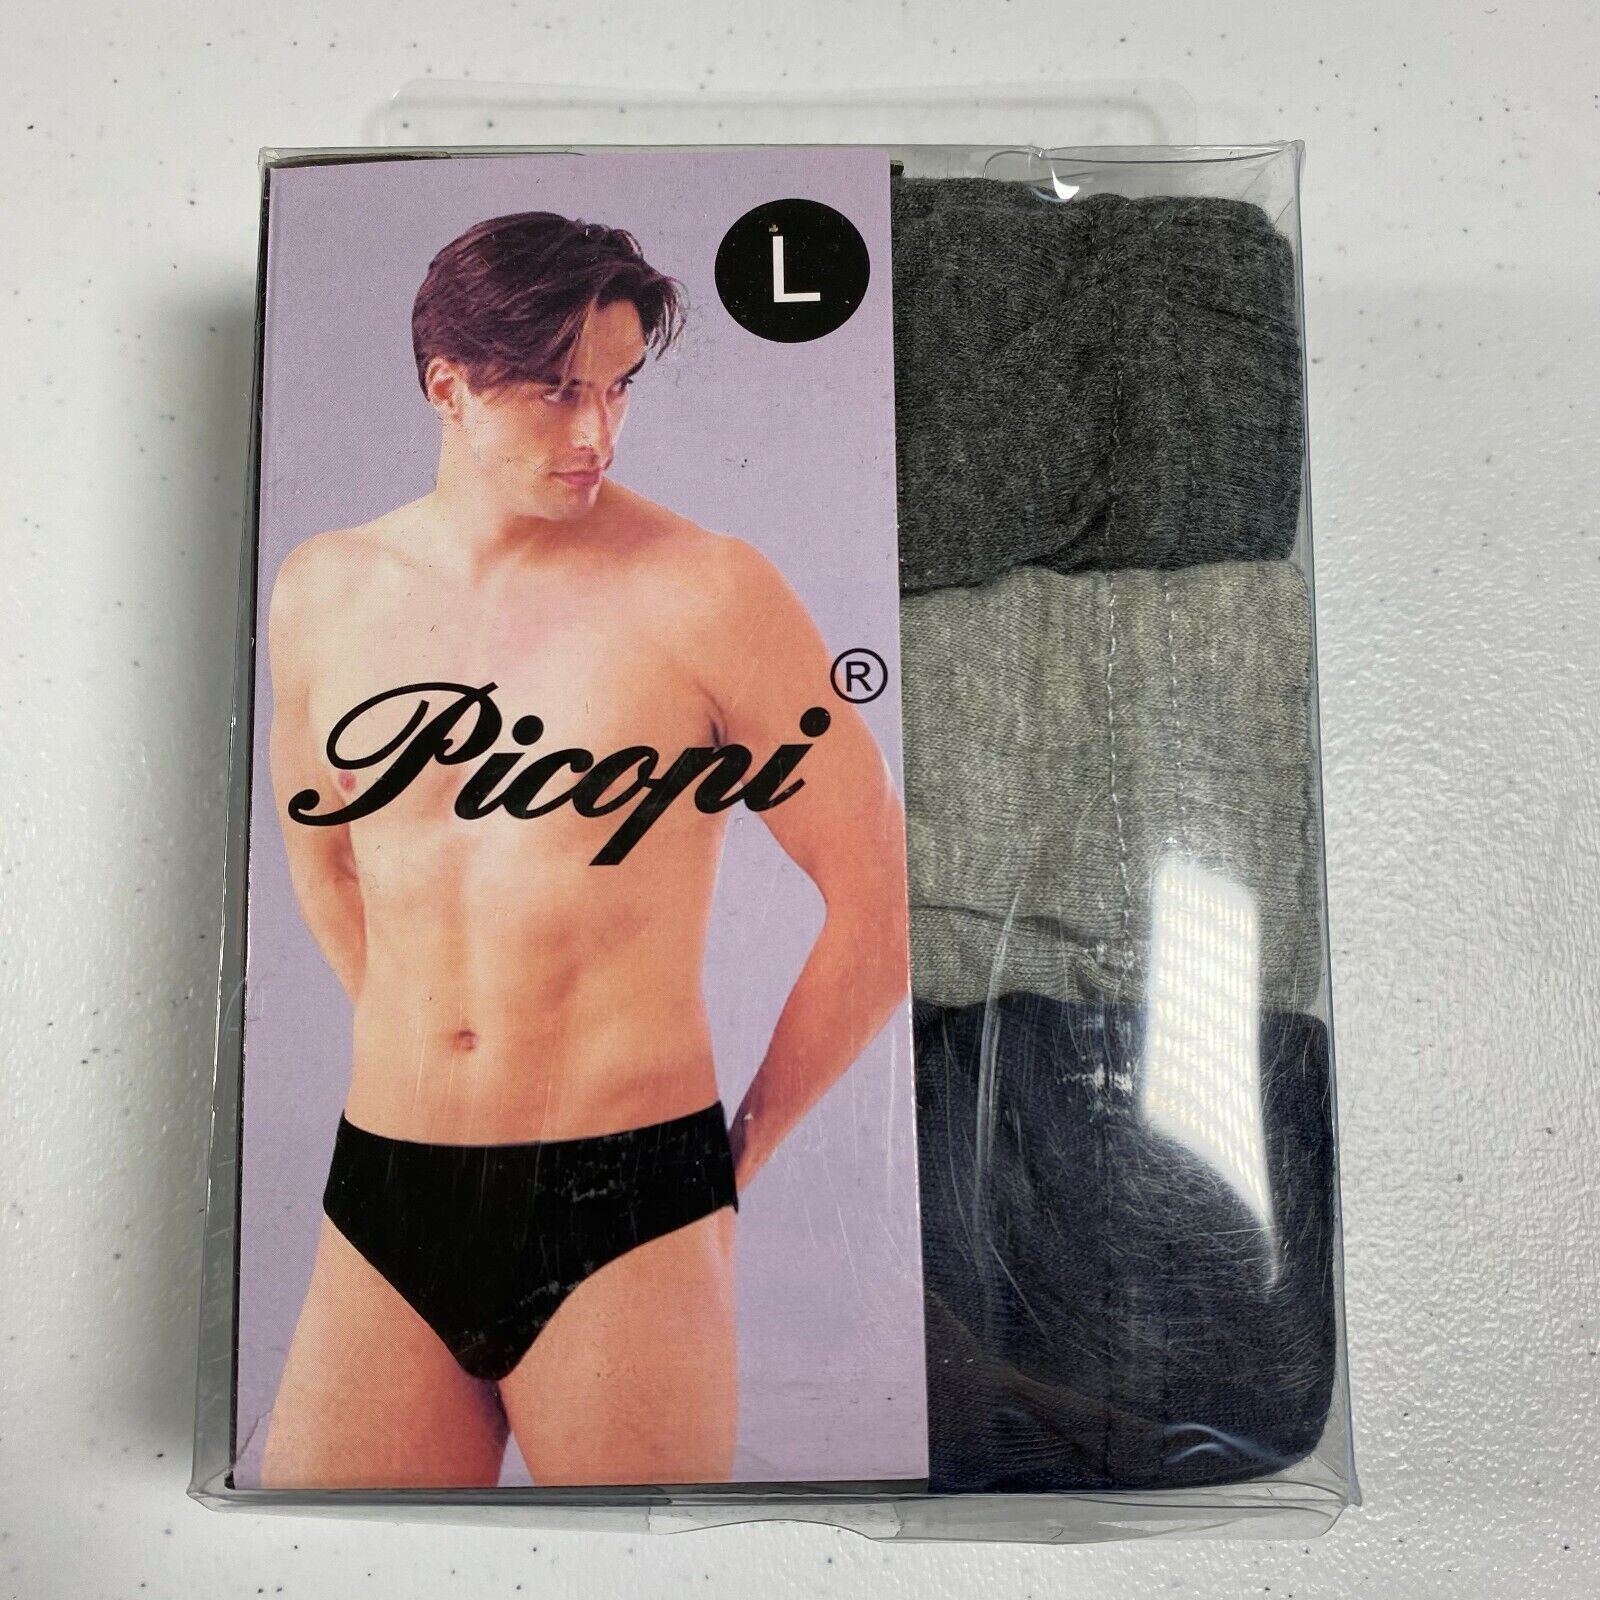 New Picopi Briefs Mens Large 36-38 Underwear and 50 similar items